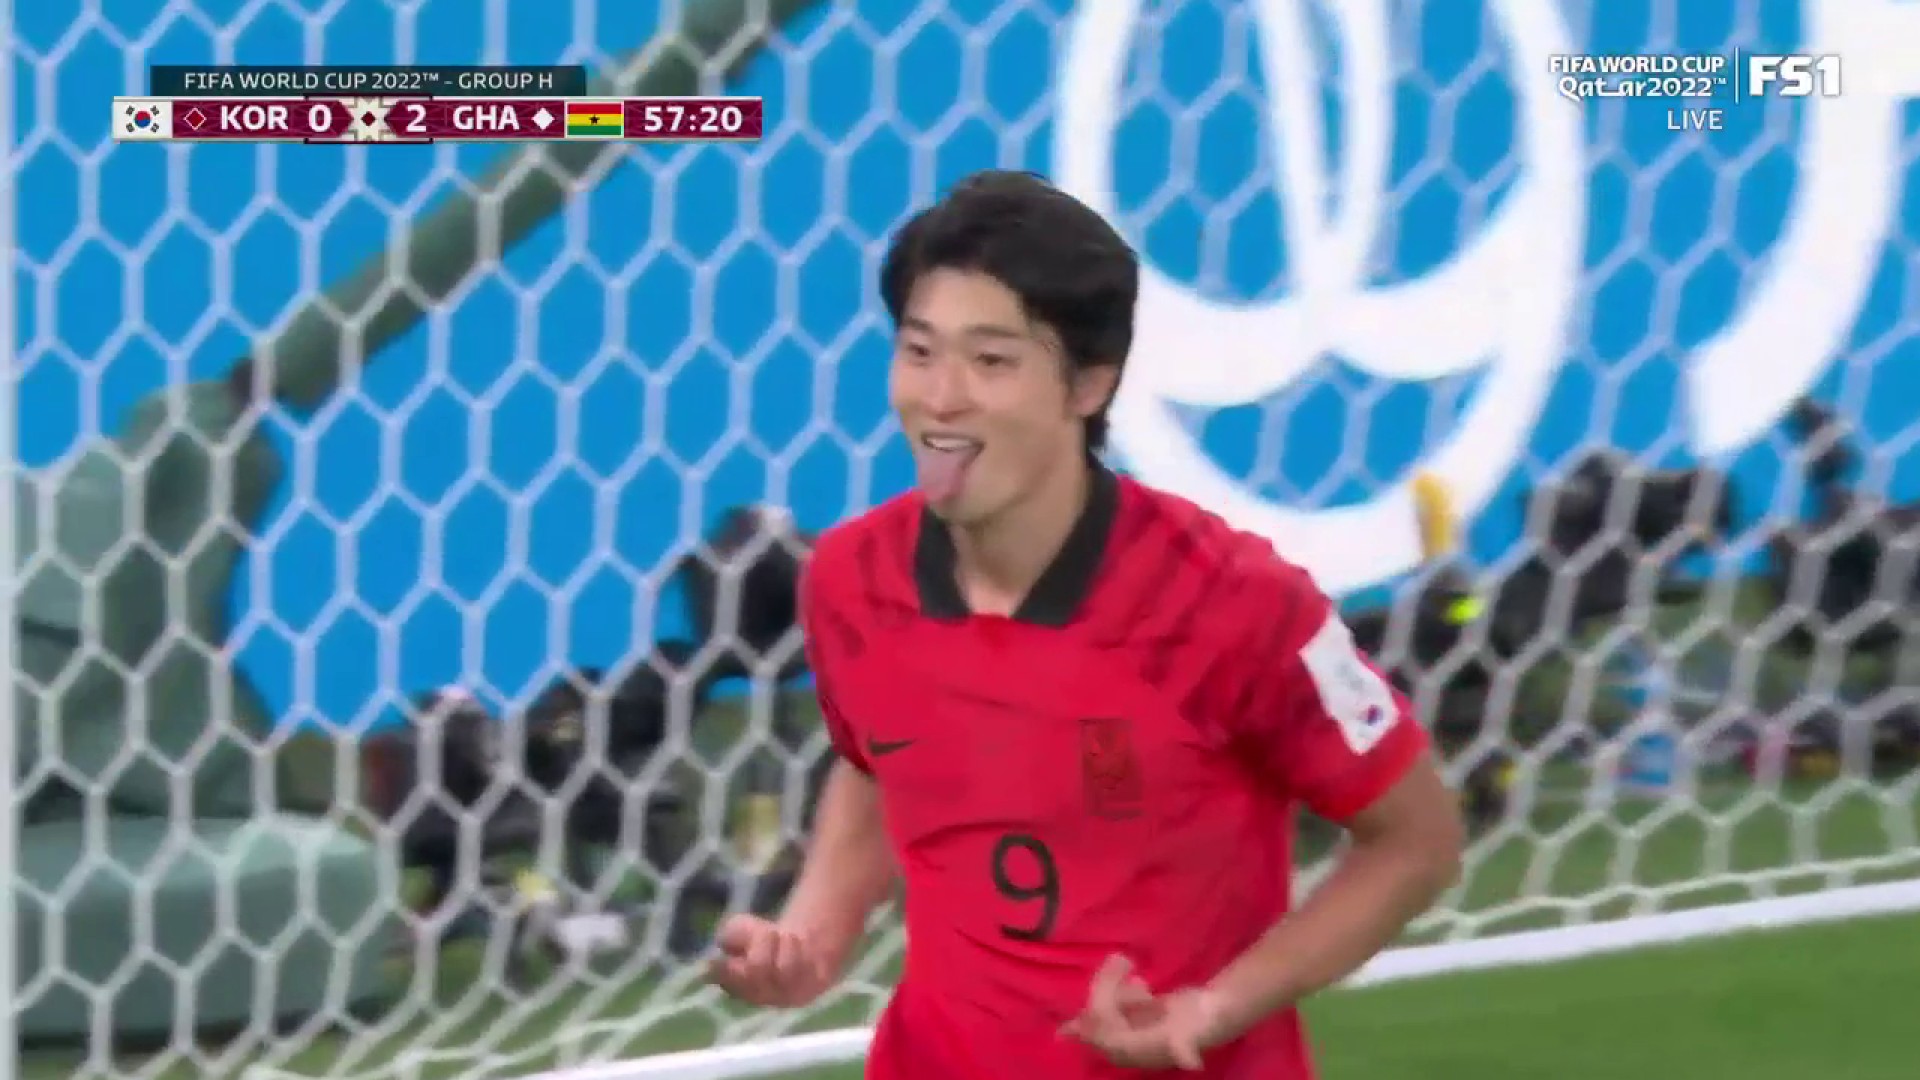 SOUTH KOREA TAKES ONE BACK 🇰🇷

Game. On.”